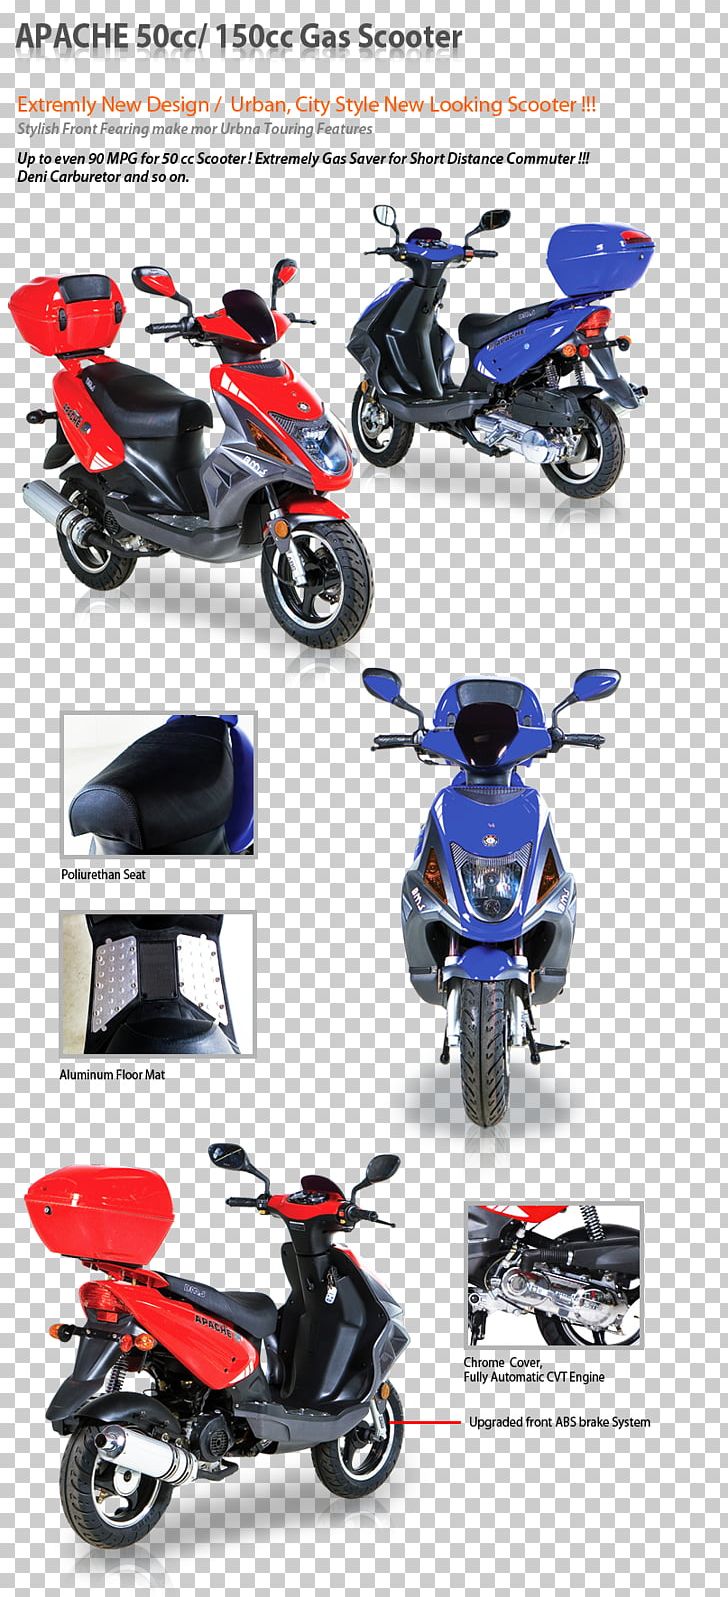 Scooter Motorcycle Accessories Car Motor Vehicle Motorcycle Fairing PNG, Clipart, Aircraft Fairing, Automotive Design, Bicycle, Bicycle Accessory, Car Free PNG Download